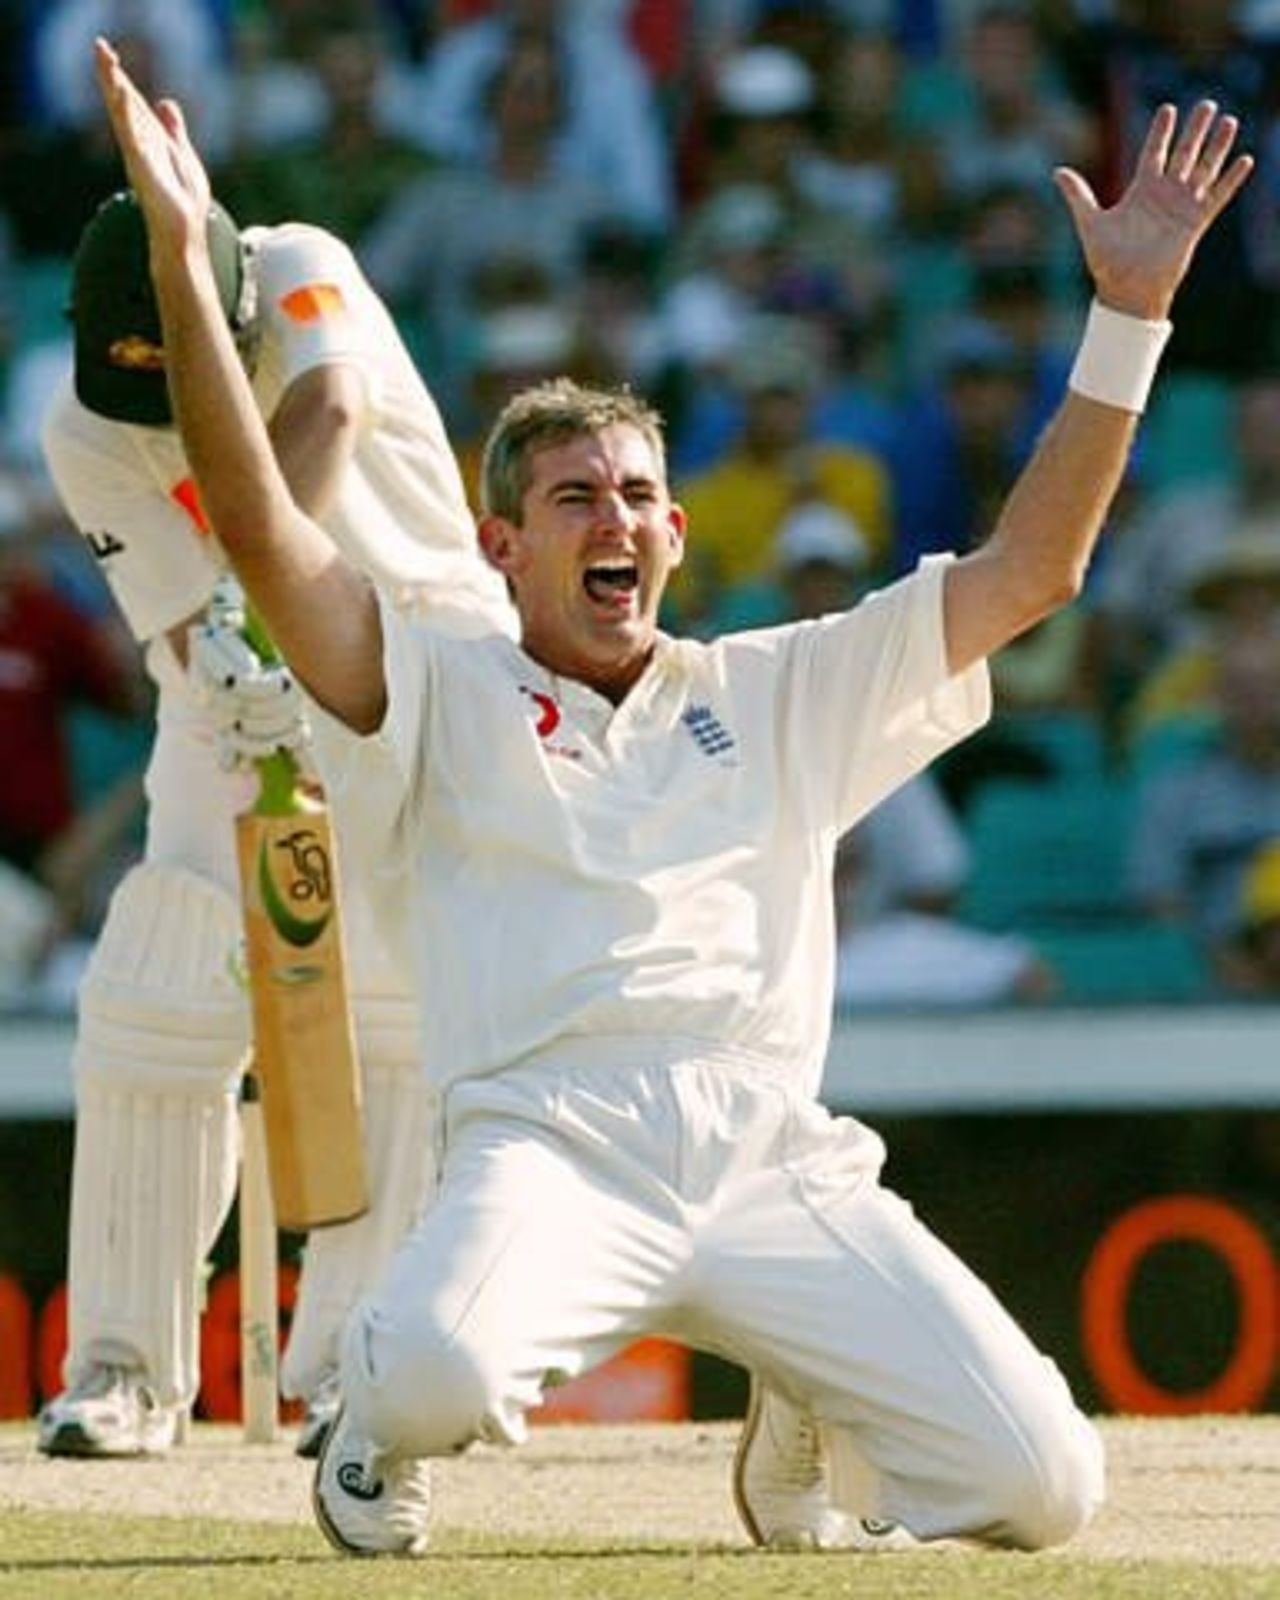 Andy Caddick appeals successfully for the wicket of Ponting, Fifth Ashes Test, Sydney, Sun 5 Jan 2003